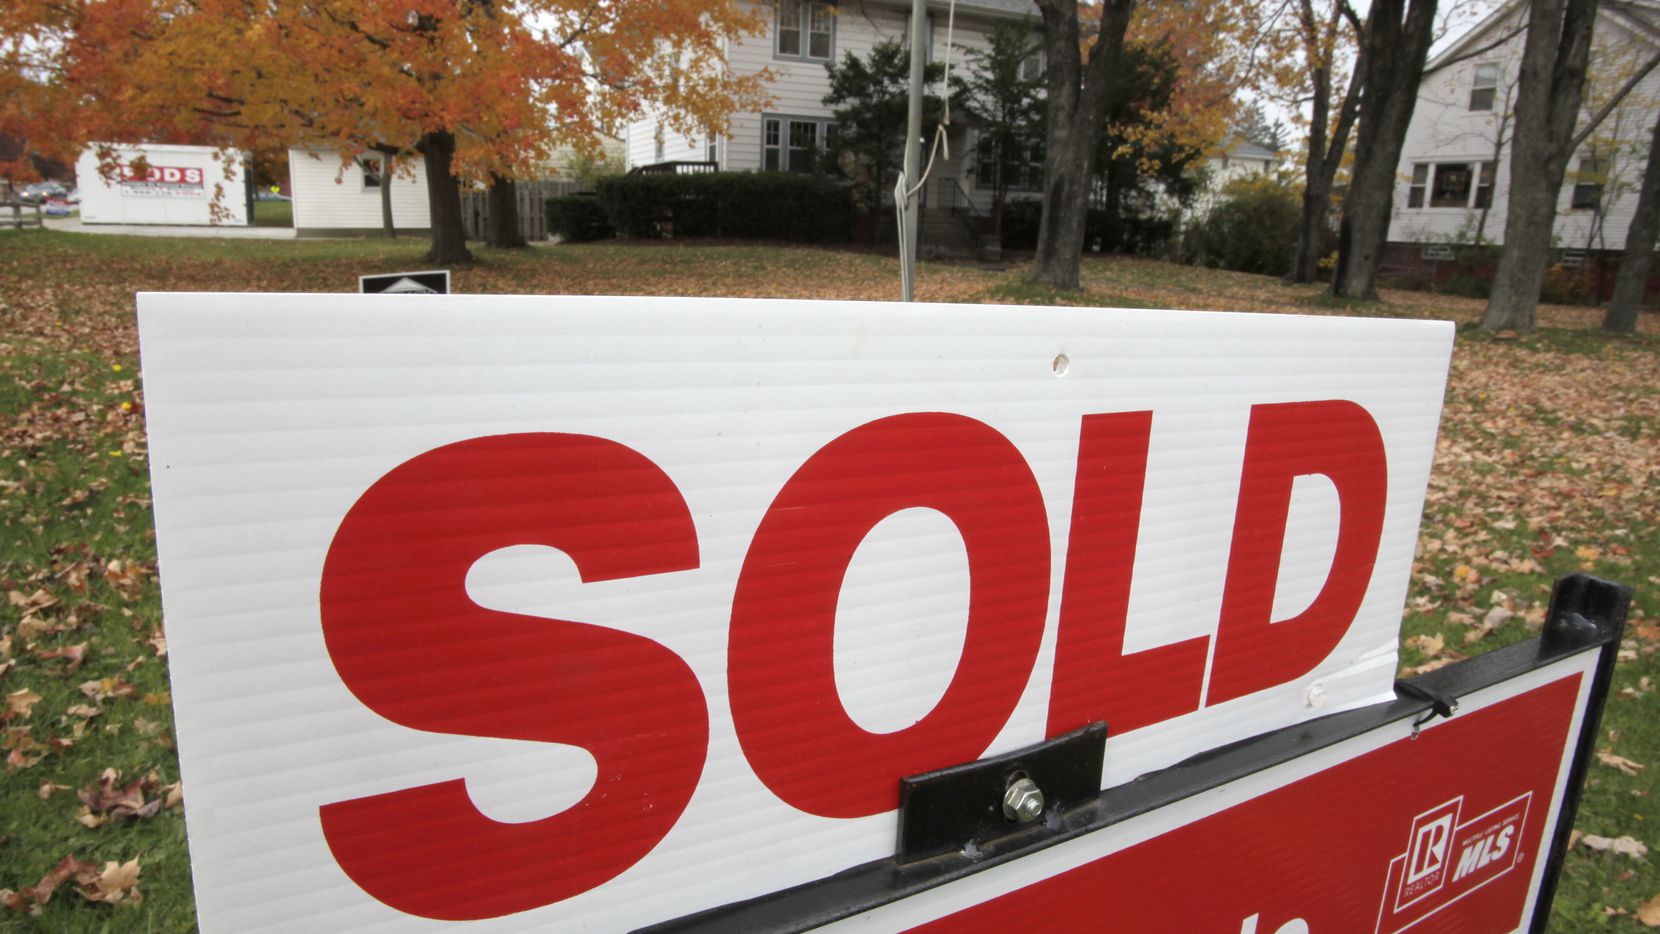 September saw the largest percentage North Texas home sales gain in more than a decade.